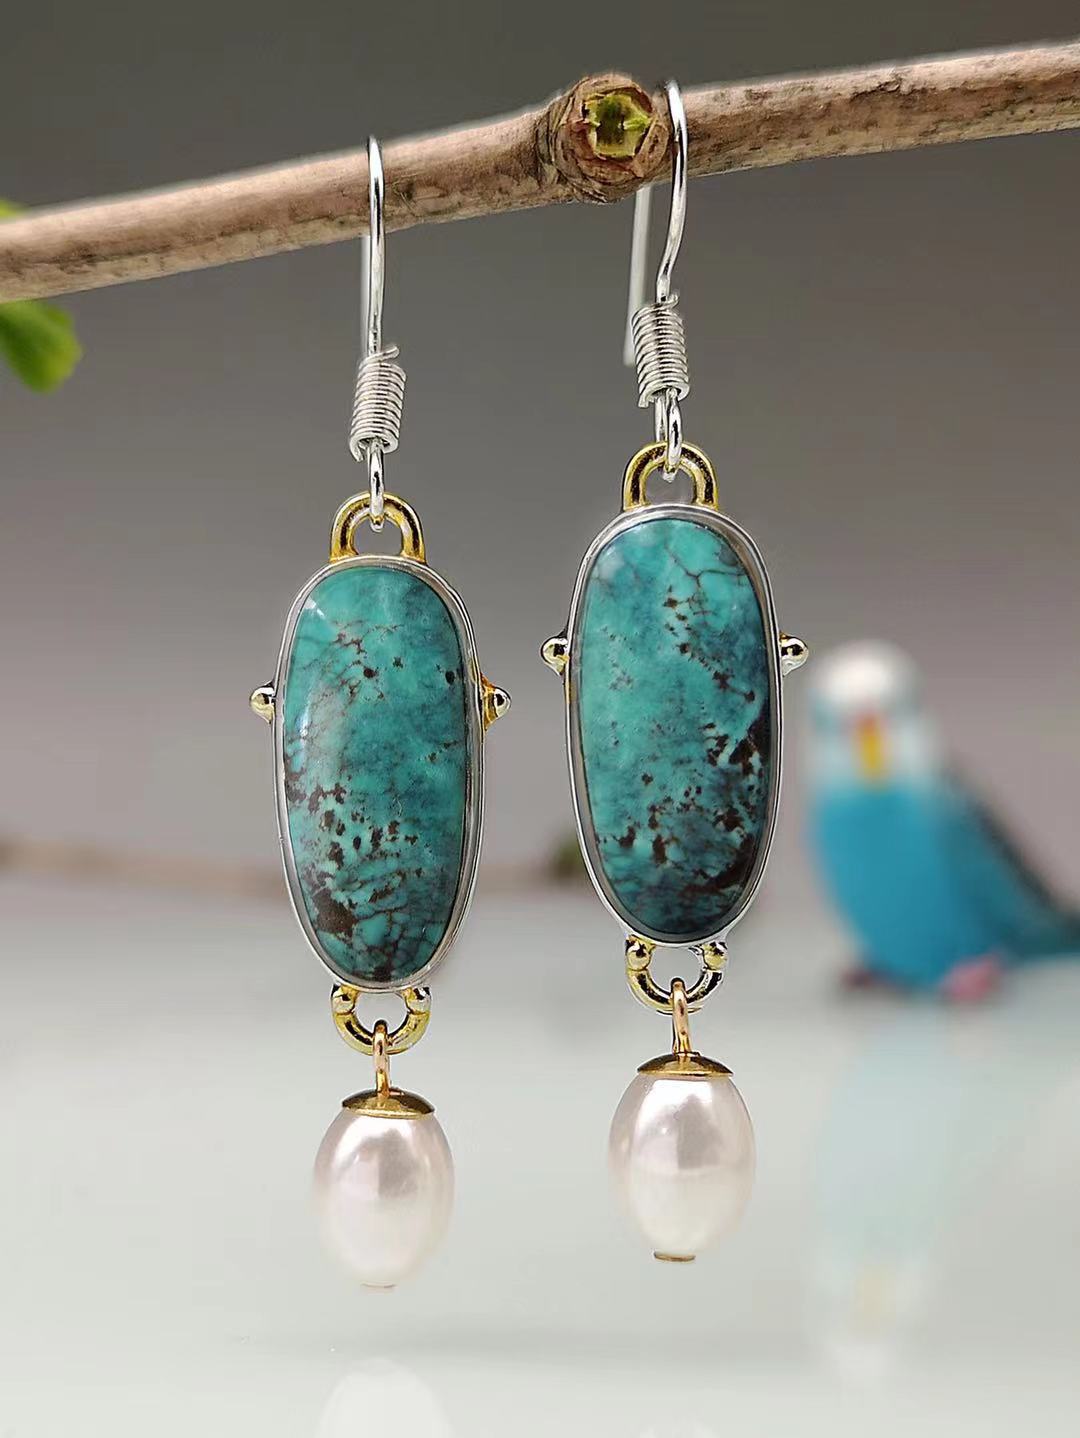 Exquisite  Pear Drop Fashion Earrings